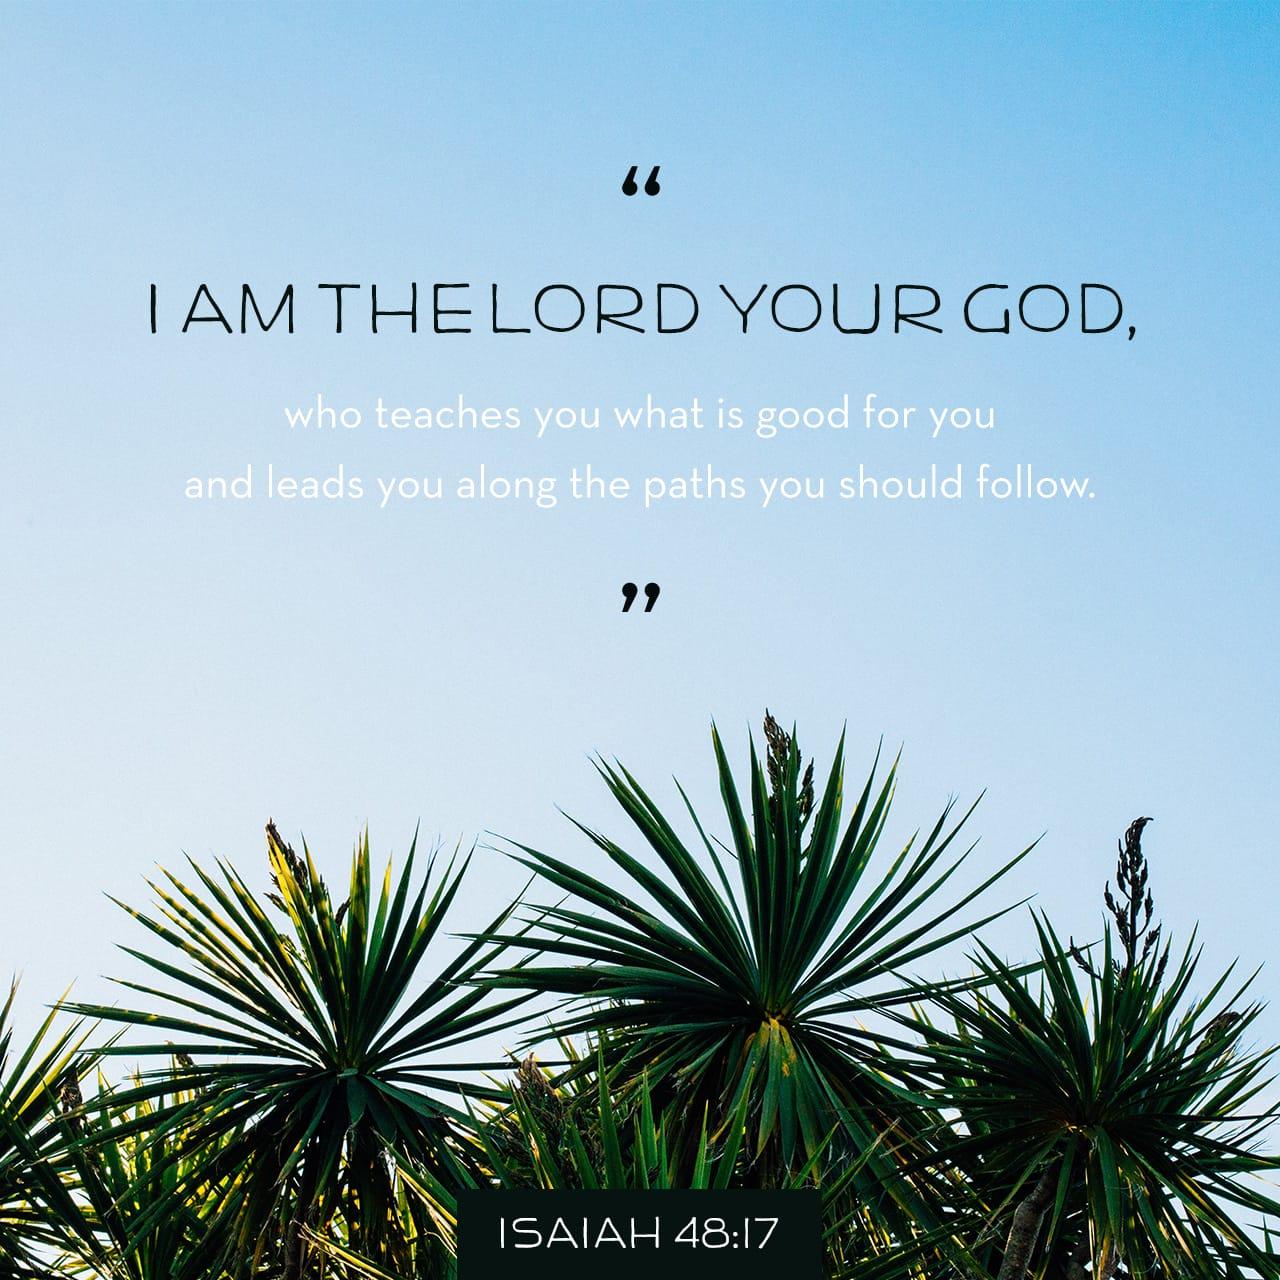 Bible Verse of the Day - day 90 - image 2933 (Isaiah 48:17-18)